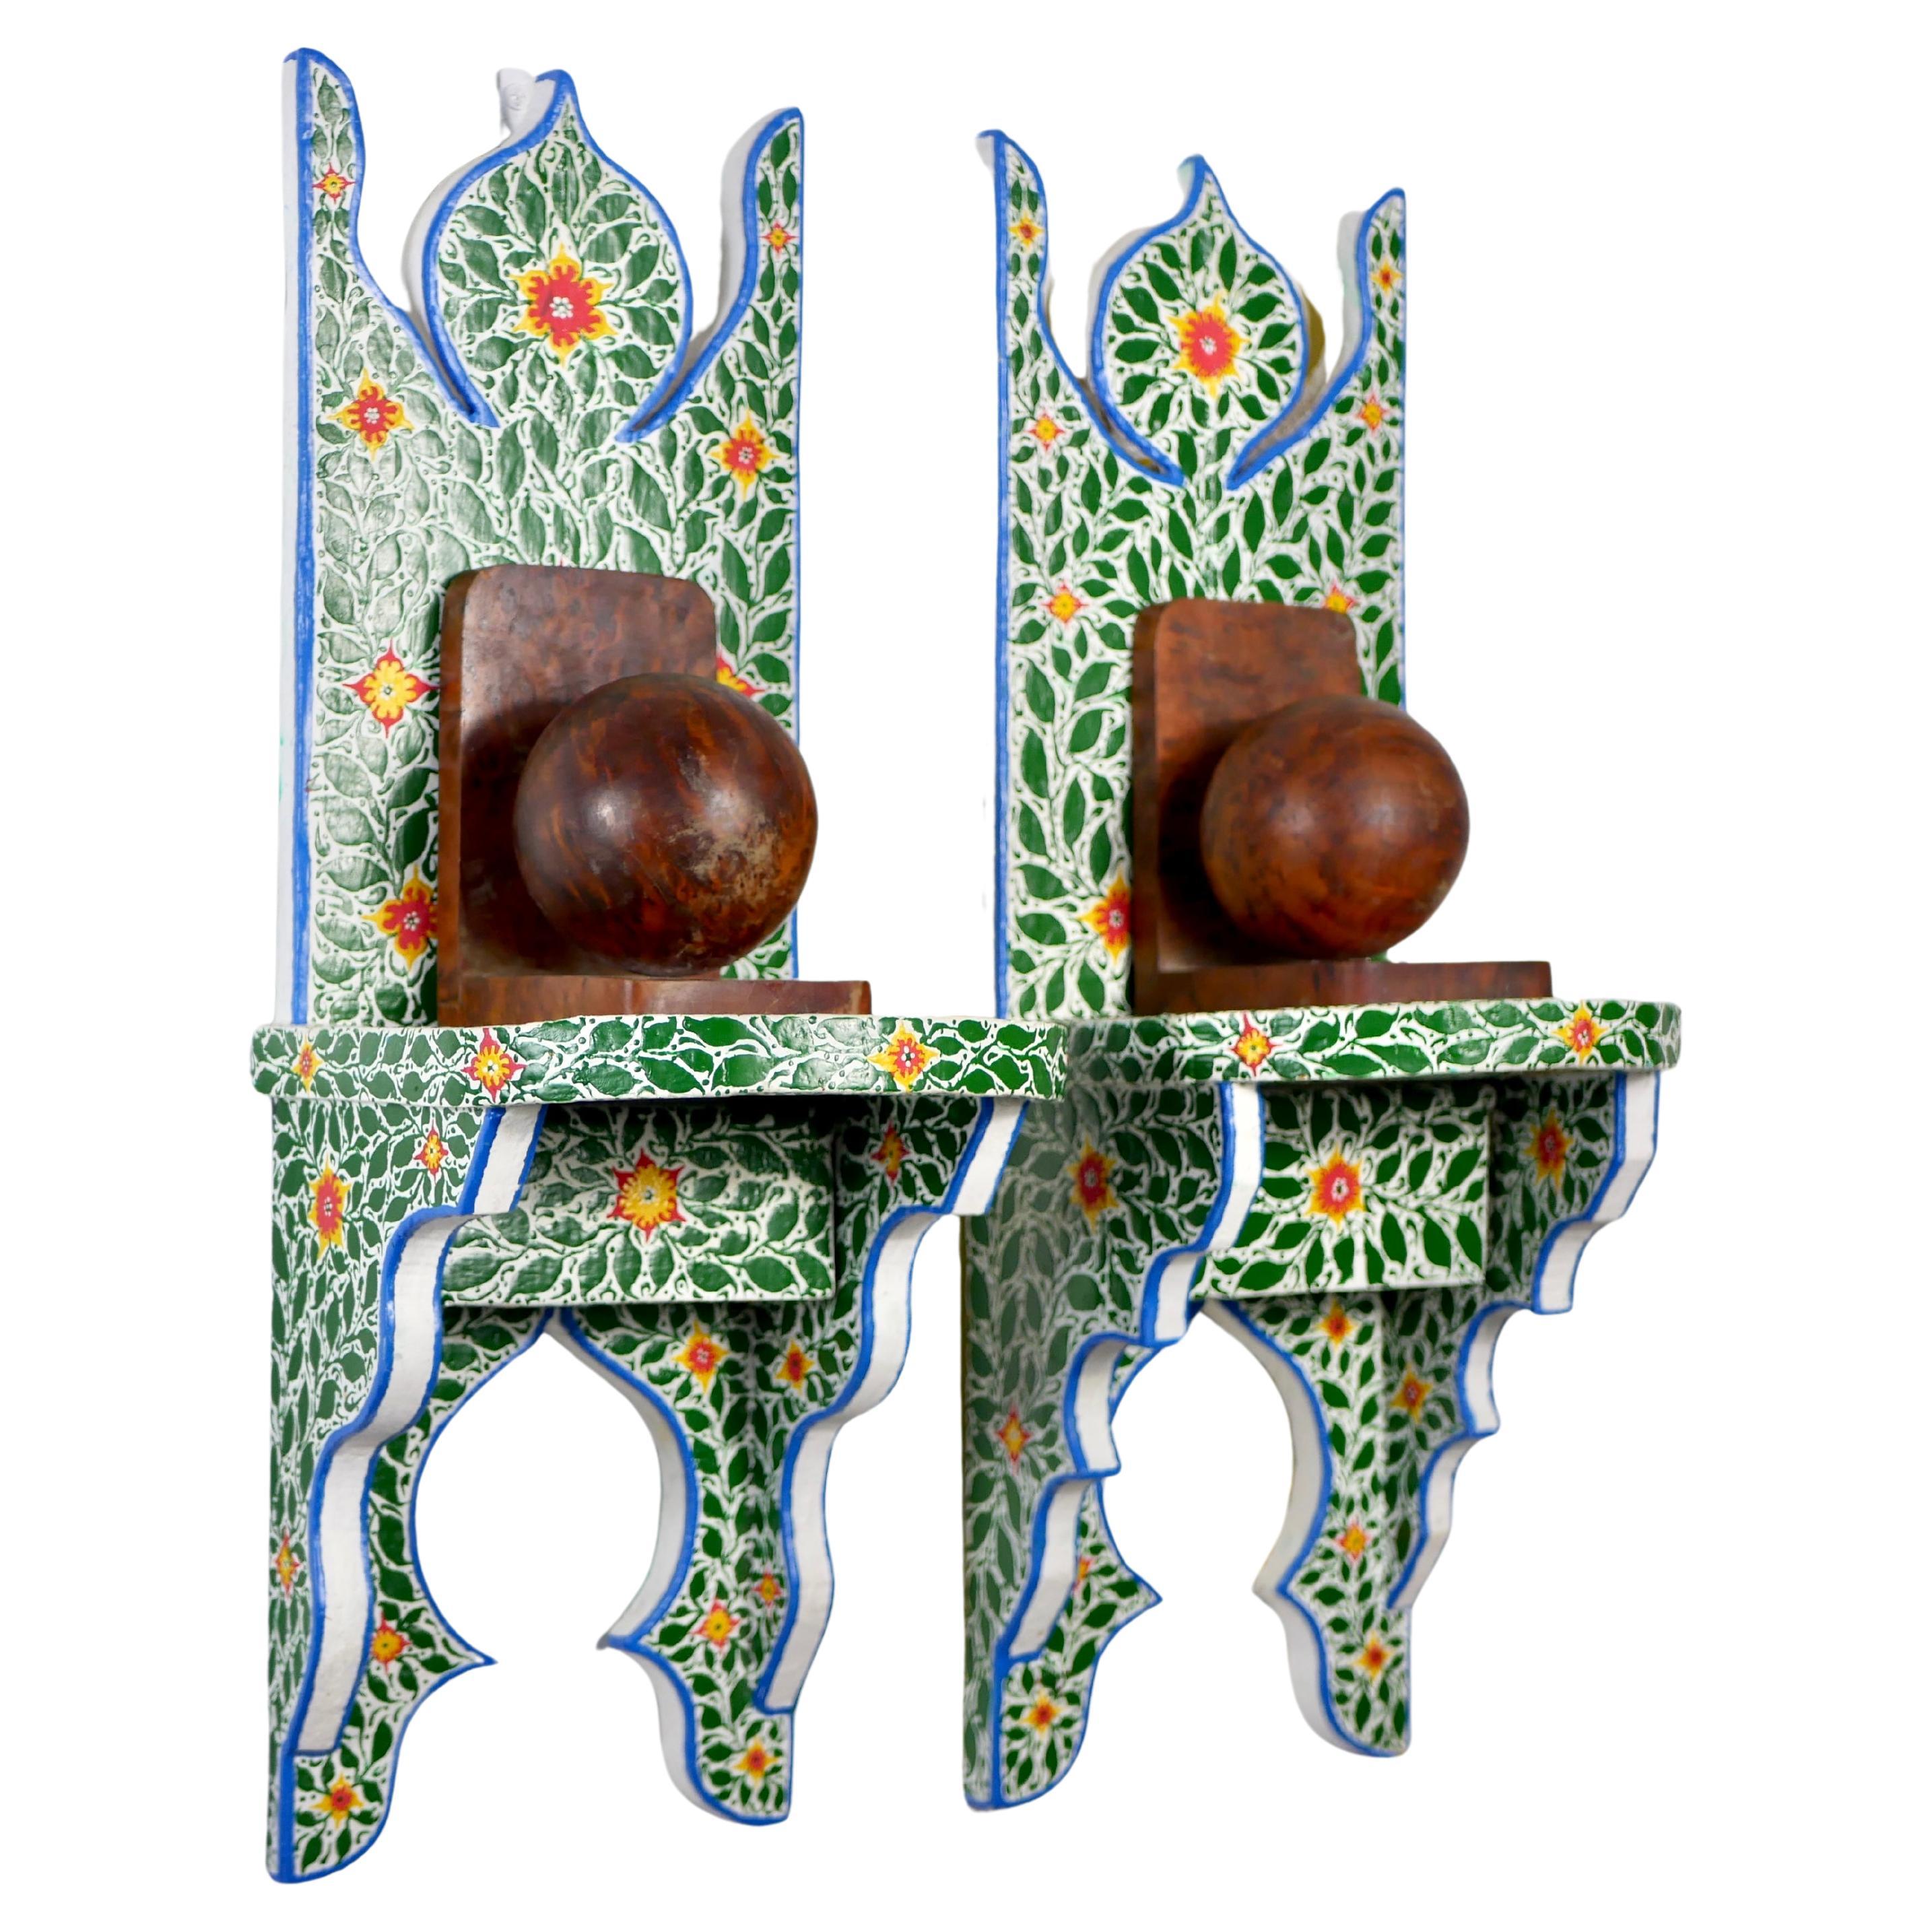 Adorable pair of bedside tables or shelves made in Tunisia and directly brought back from our last holidays there.
Carved wood and handpainted.
With a secret space for you to put your precious keys.
Would look perfect in a modern interior for a